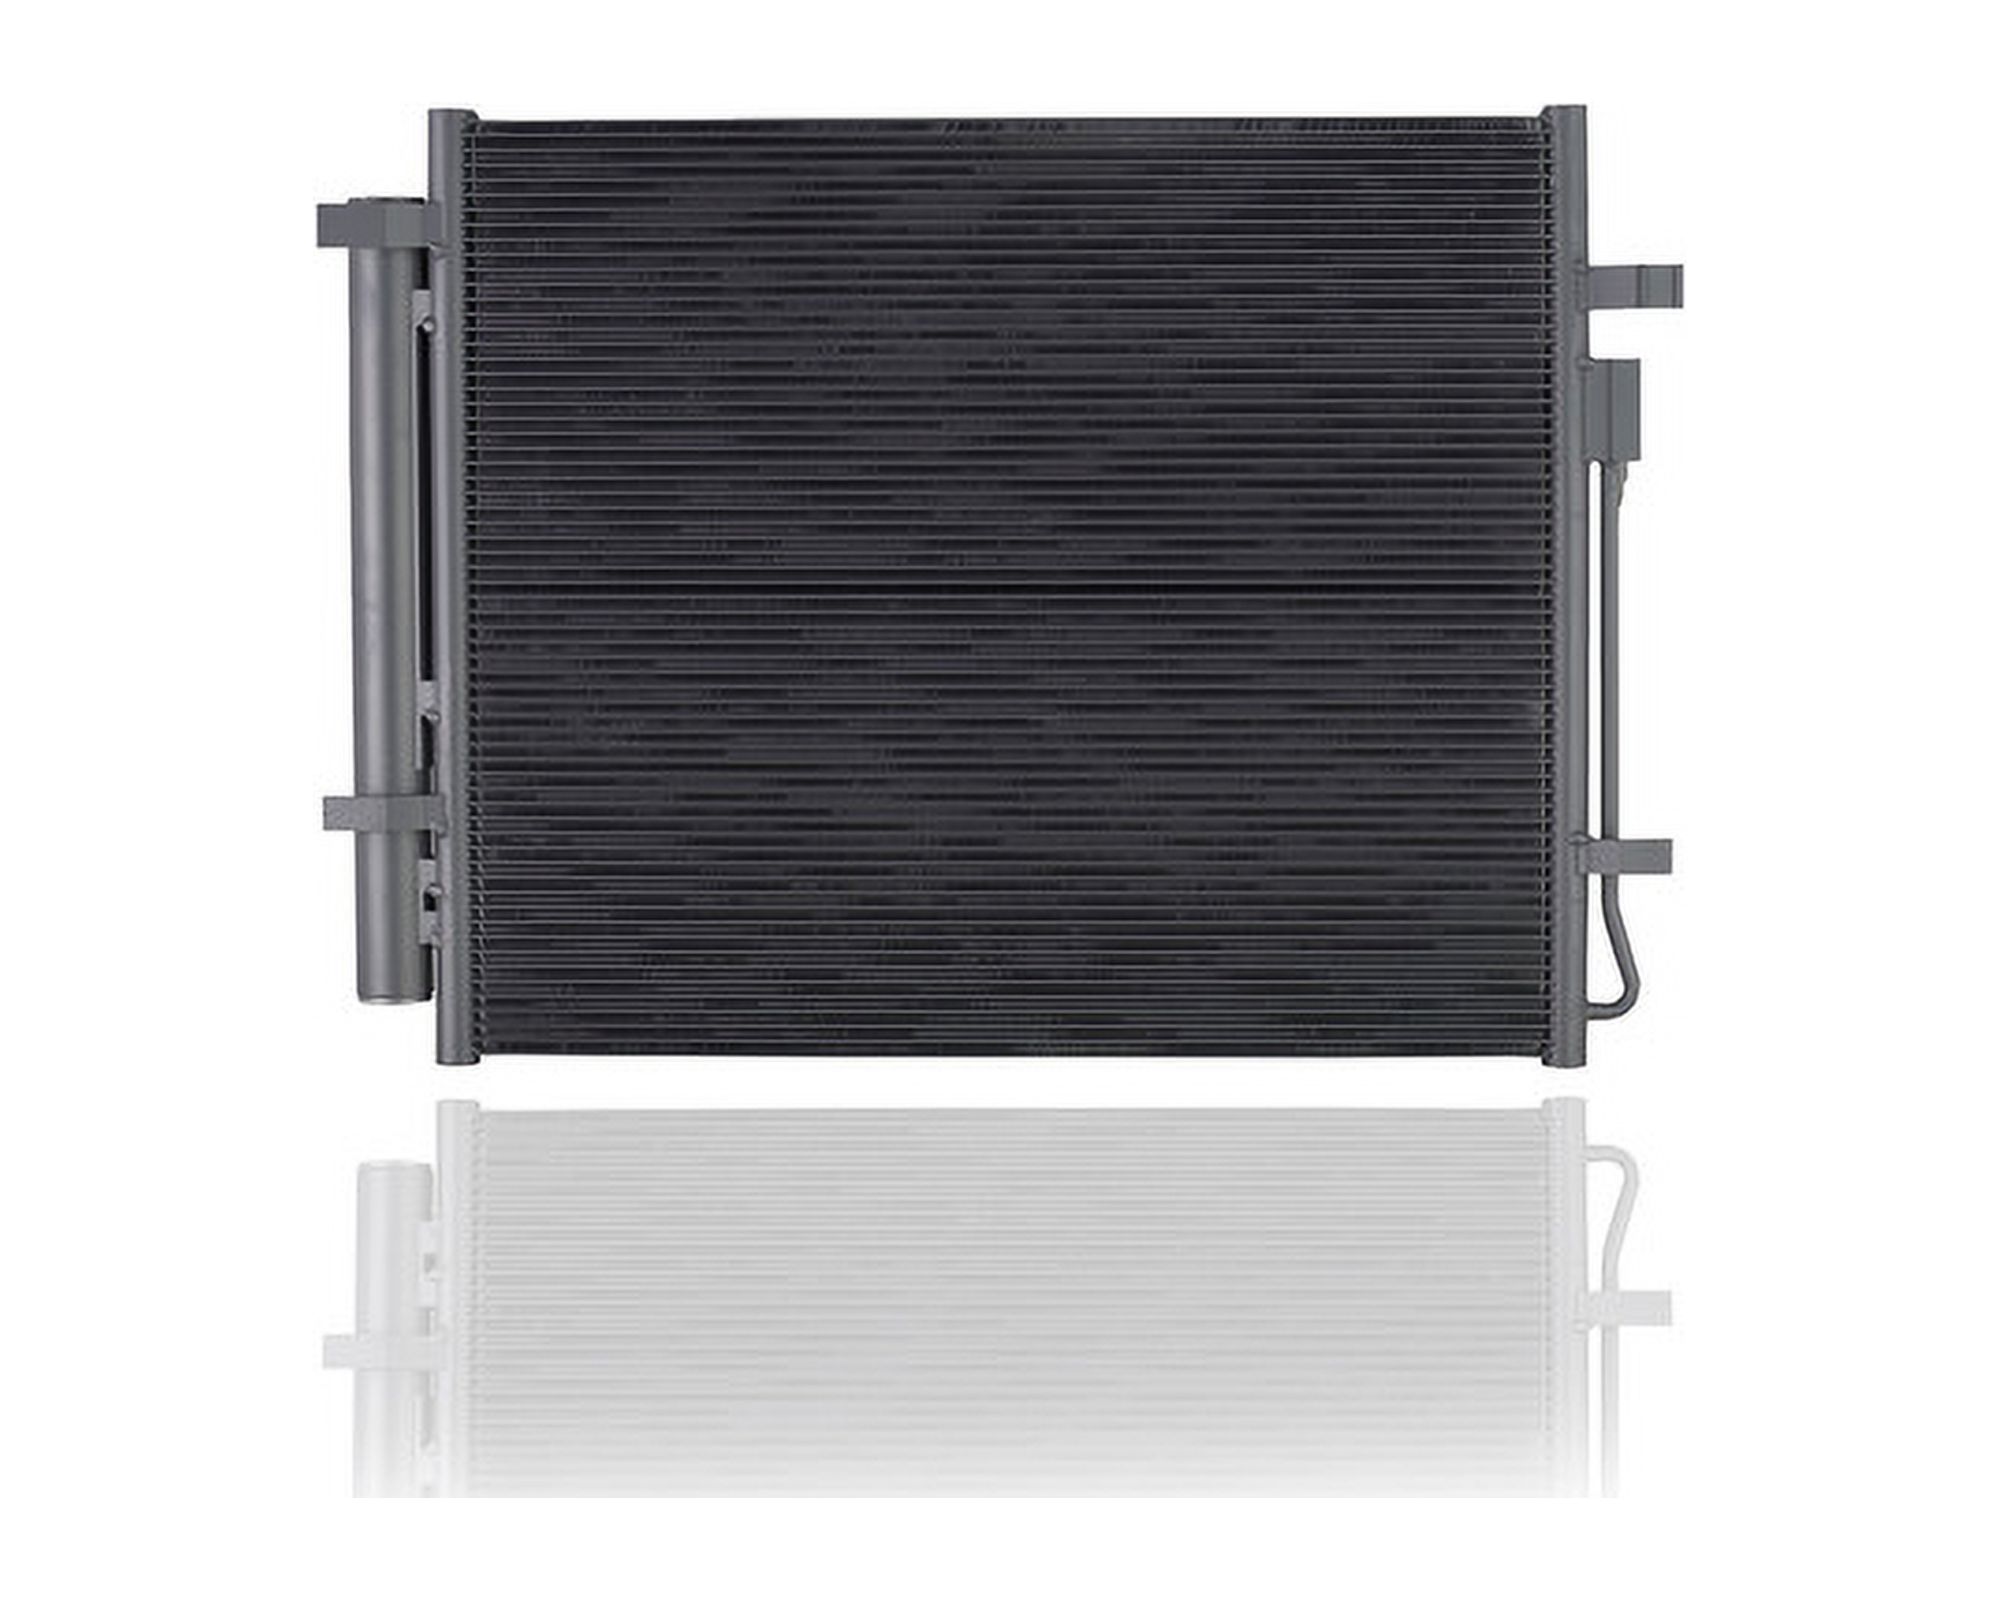 A-C Condenser - Cooling Direct Compatible/Replacement for 30207 '21-23 Hyundai Santa Fe/Santa Cruz, '21-22 Kia Sorento 4Cy 2.5 Turbo - With Receiver & Dryer - Parallel Flow - 97606P2000 - image 2 of 3